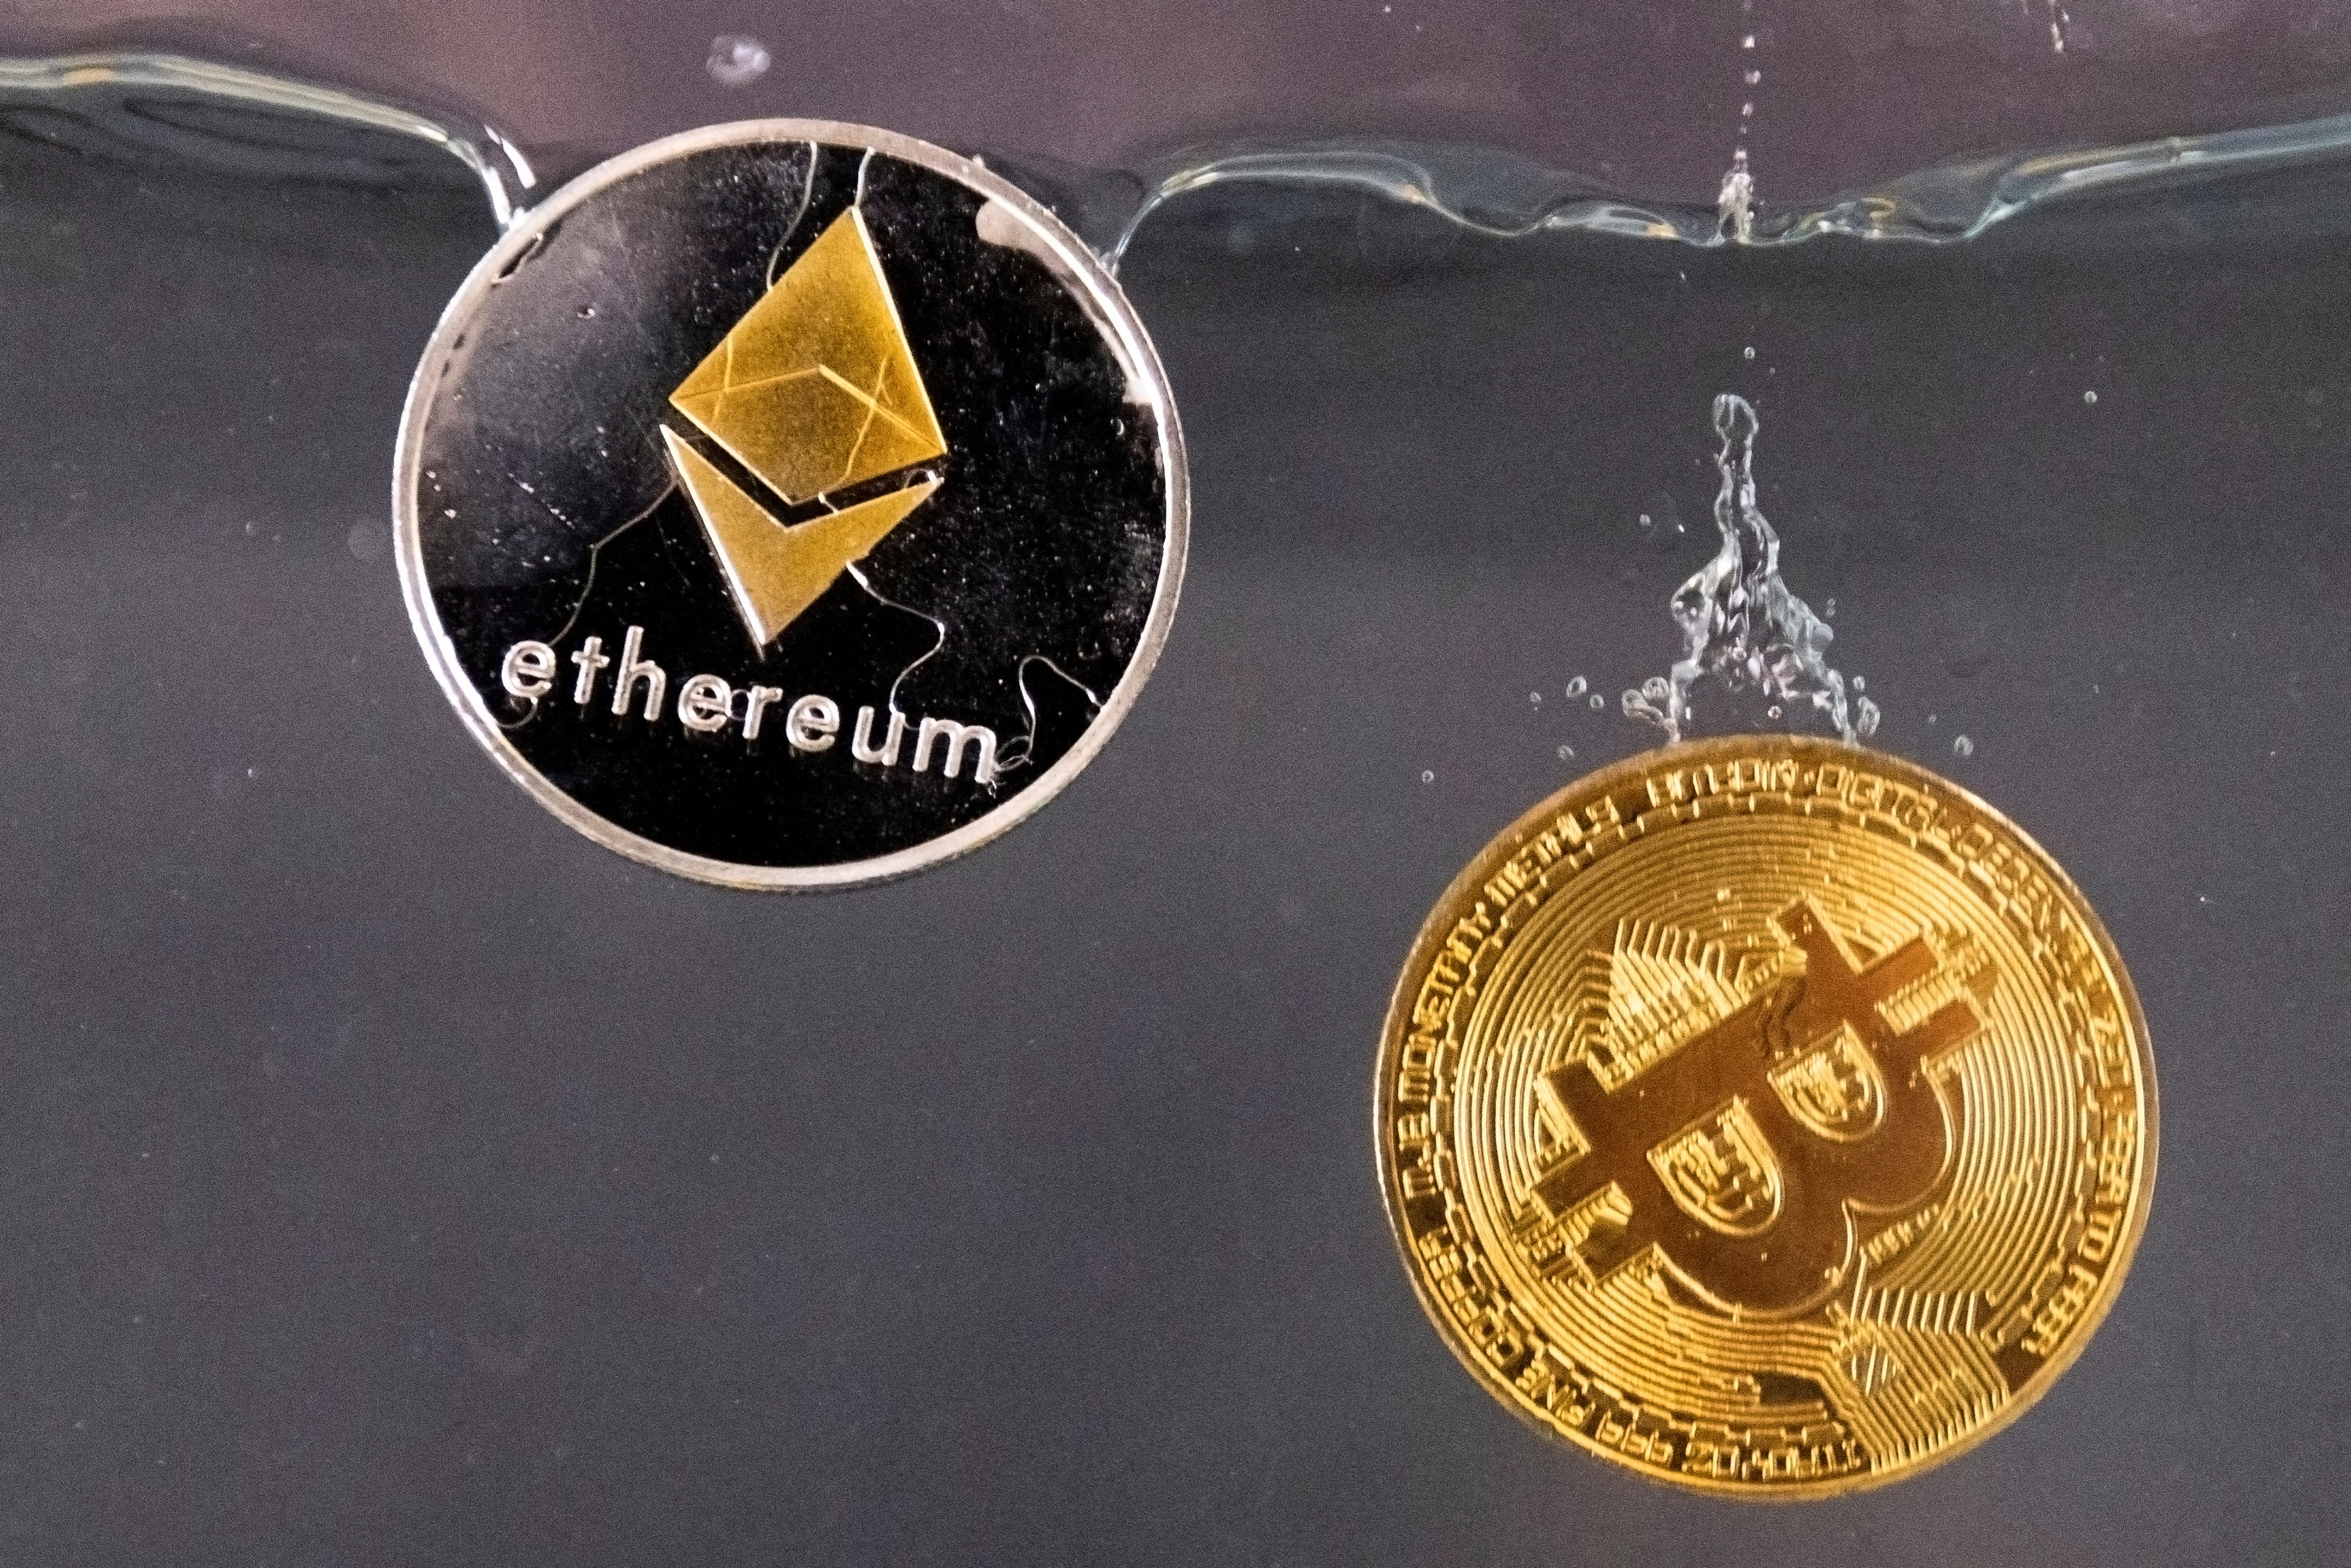 Commemorative Bitcoin and Ether tokens sink into water